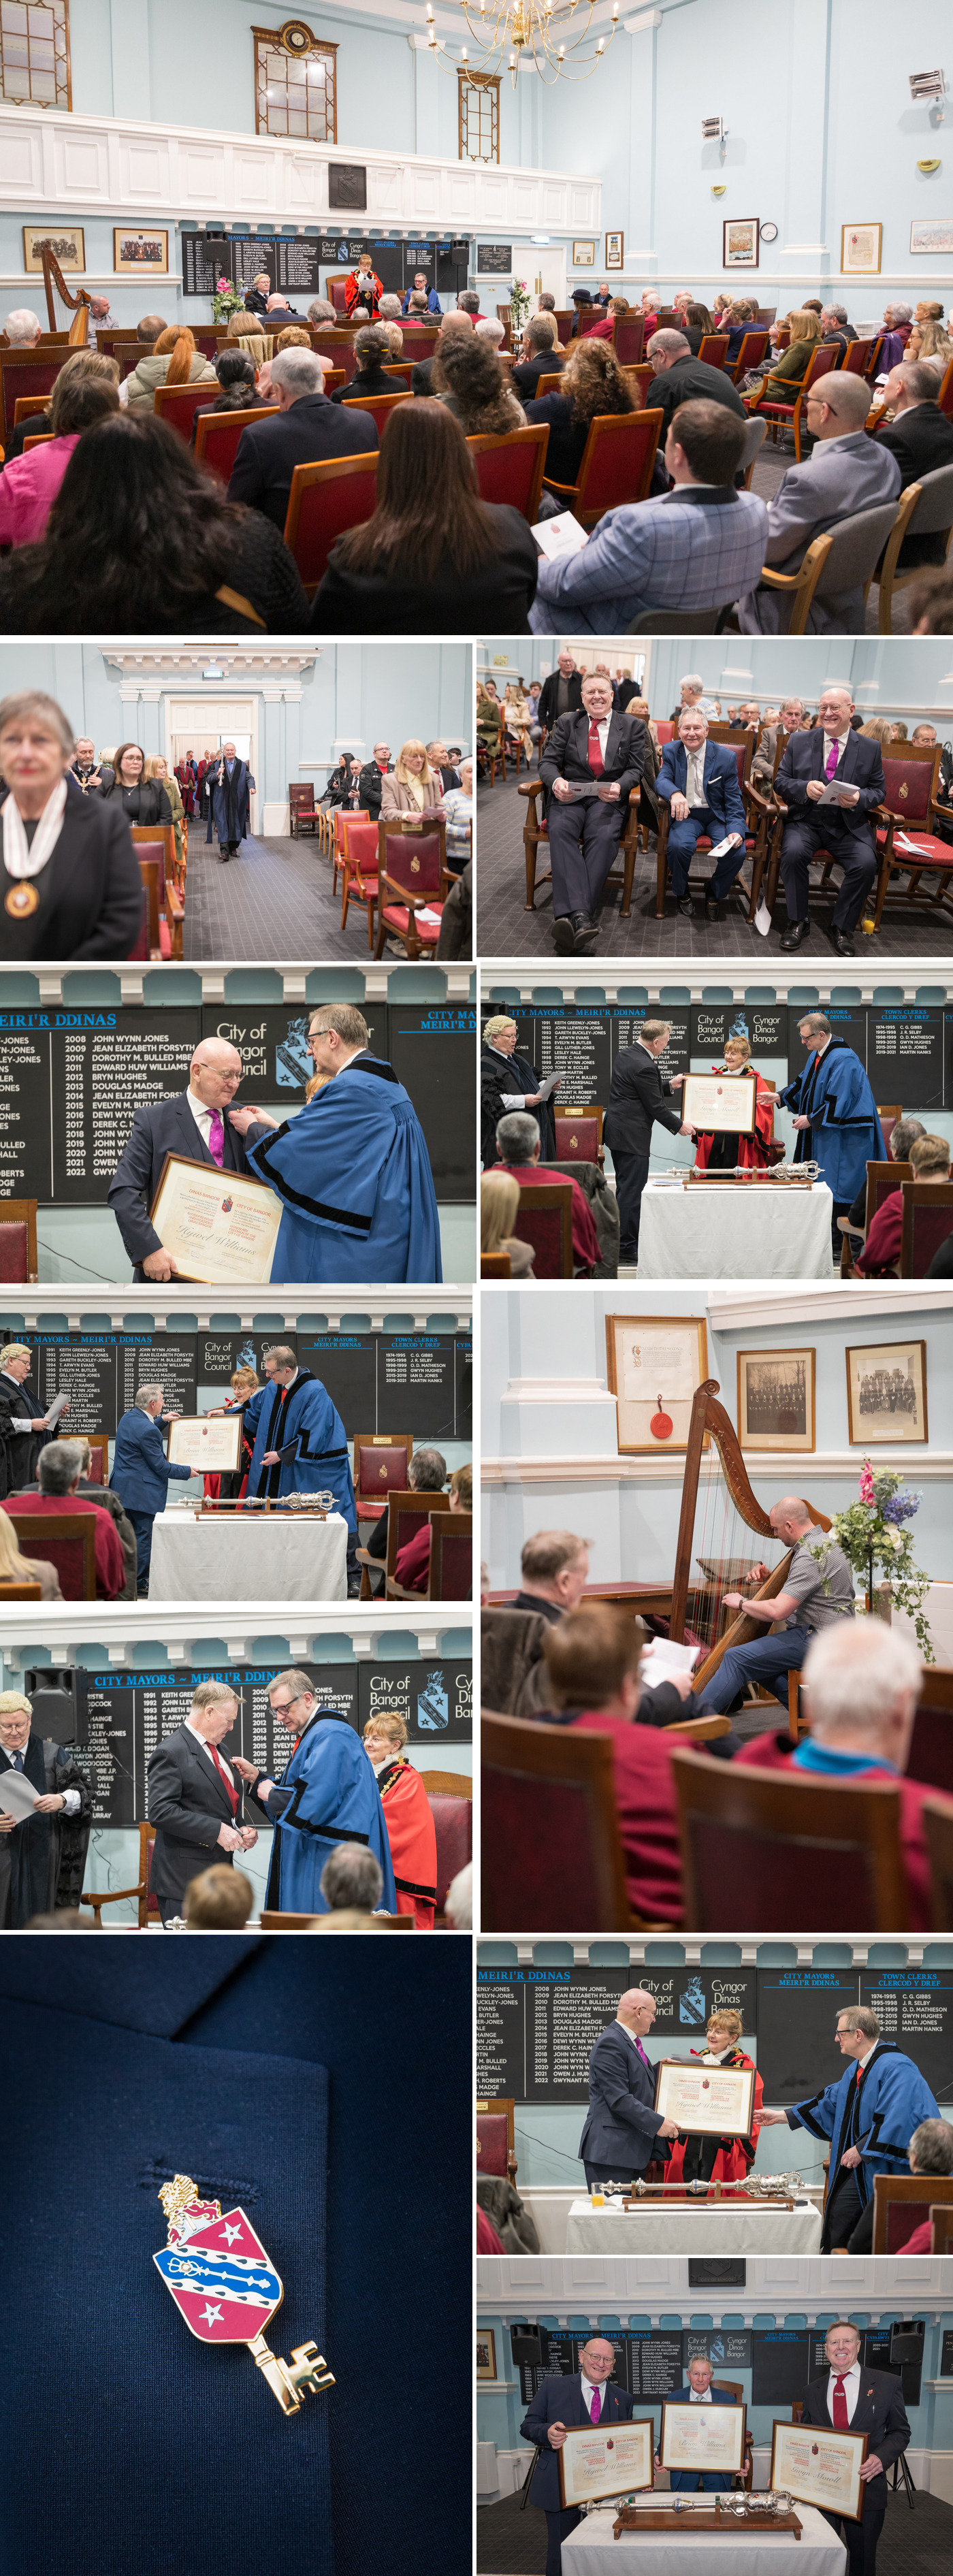 On the night of April 9th at Penrhyn Hall the Mayor Councillor Elin Walker Jones and Deputy Mayor Councillor Gareth Parry presented the Freedom of the City on behalf of the City Council.